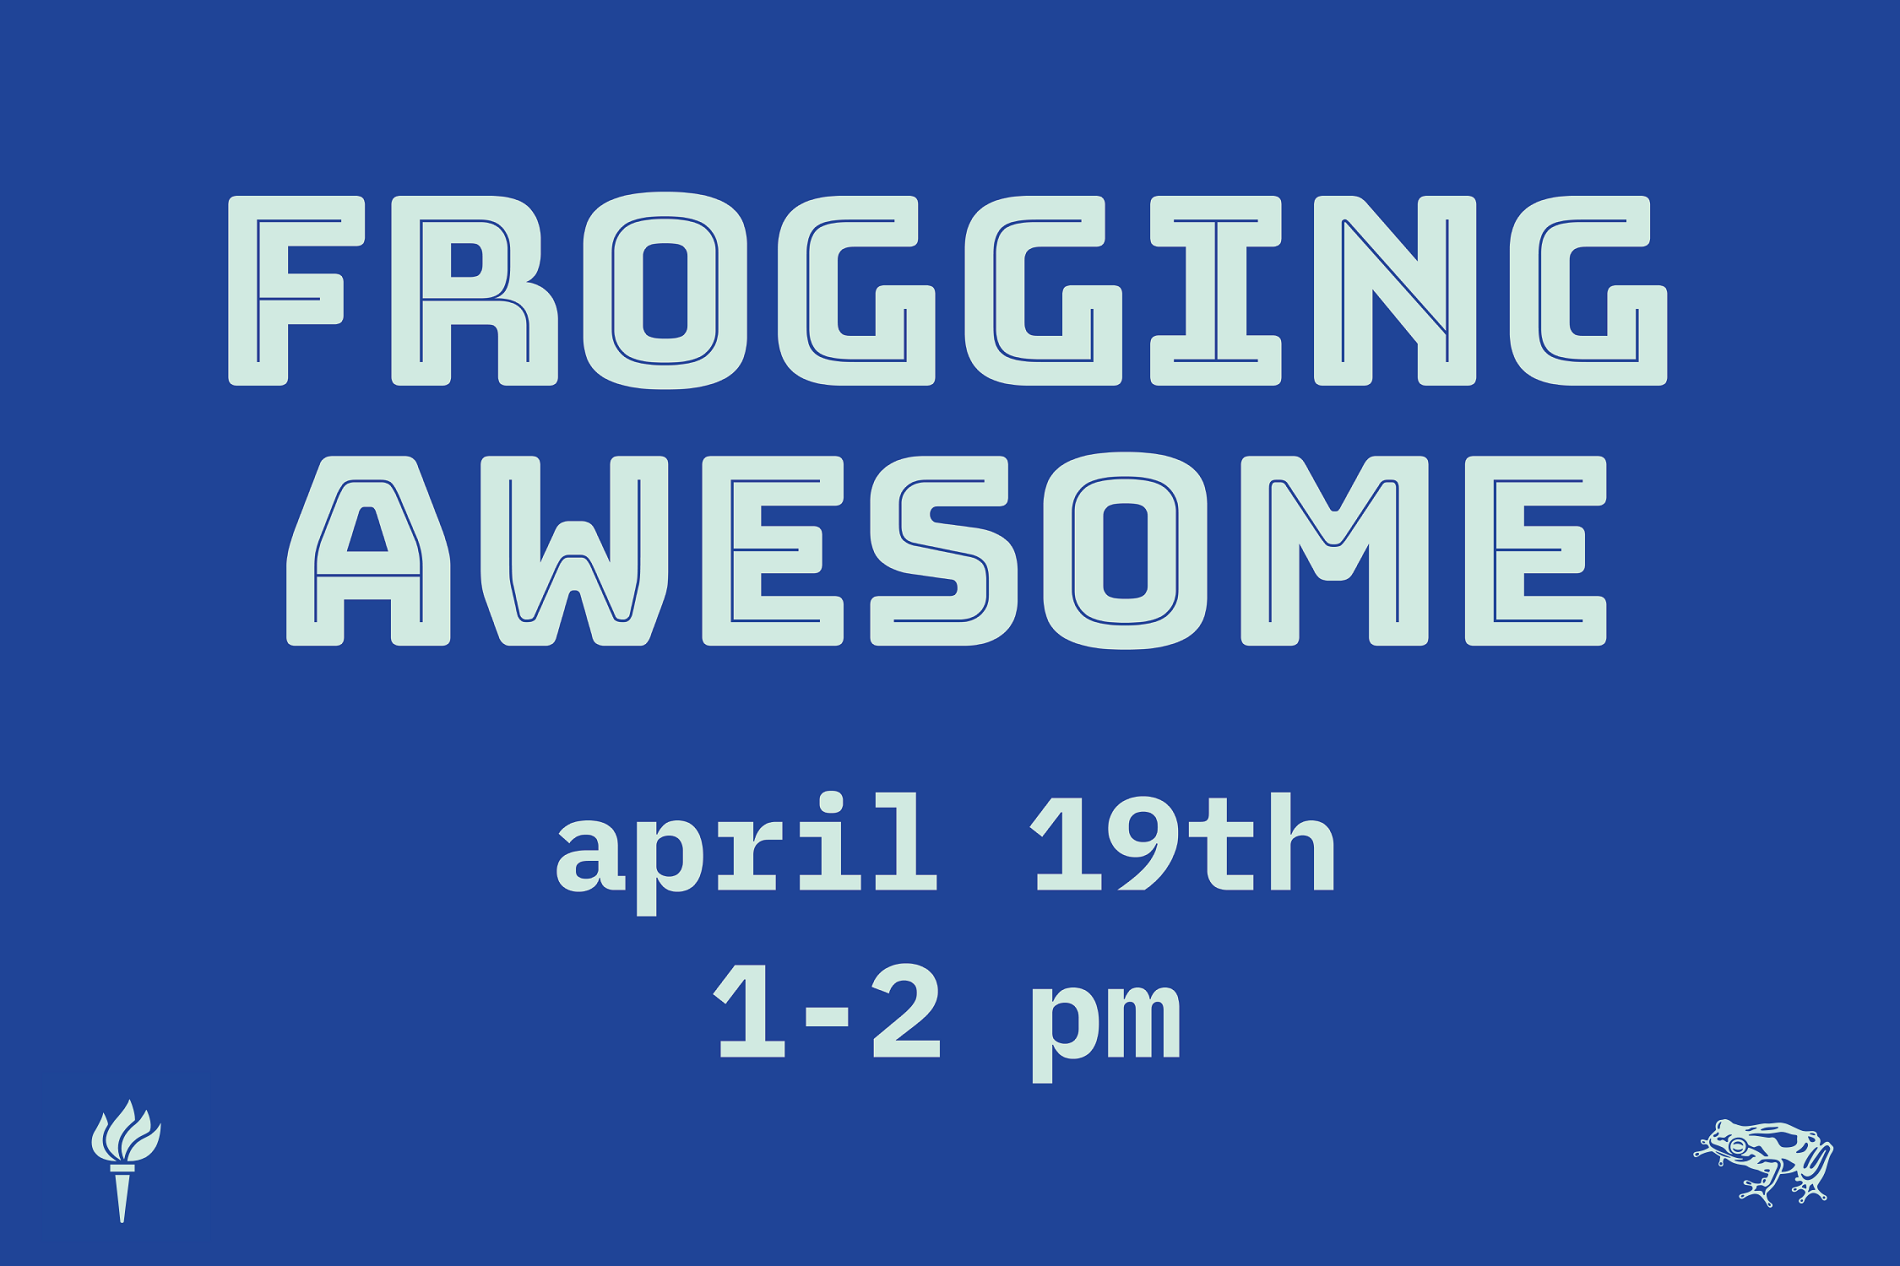 Image of poster advertising Frog Design event.